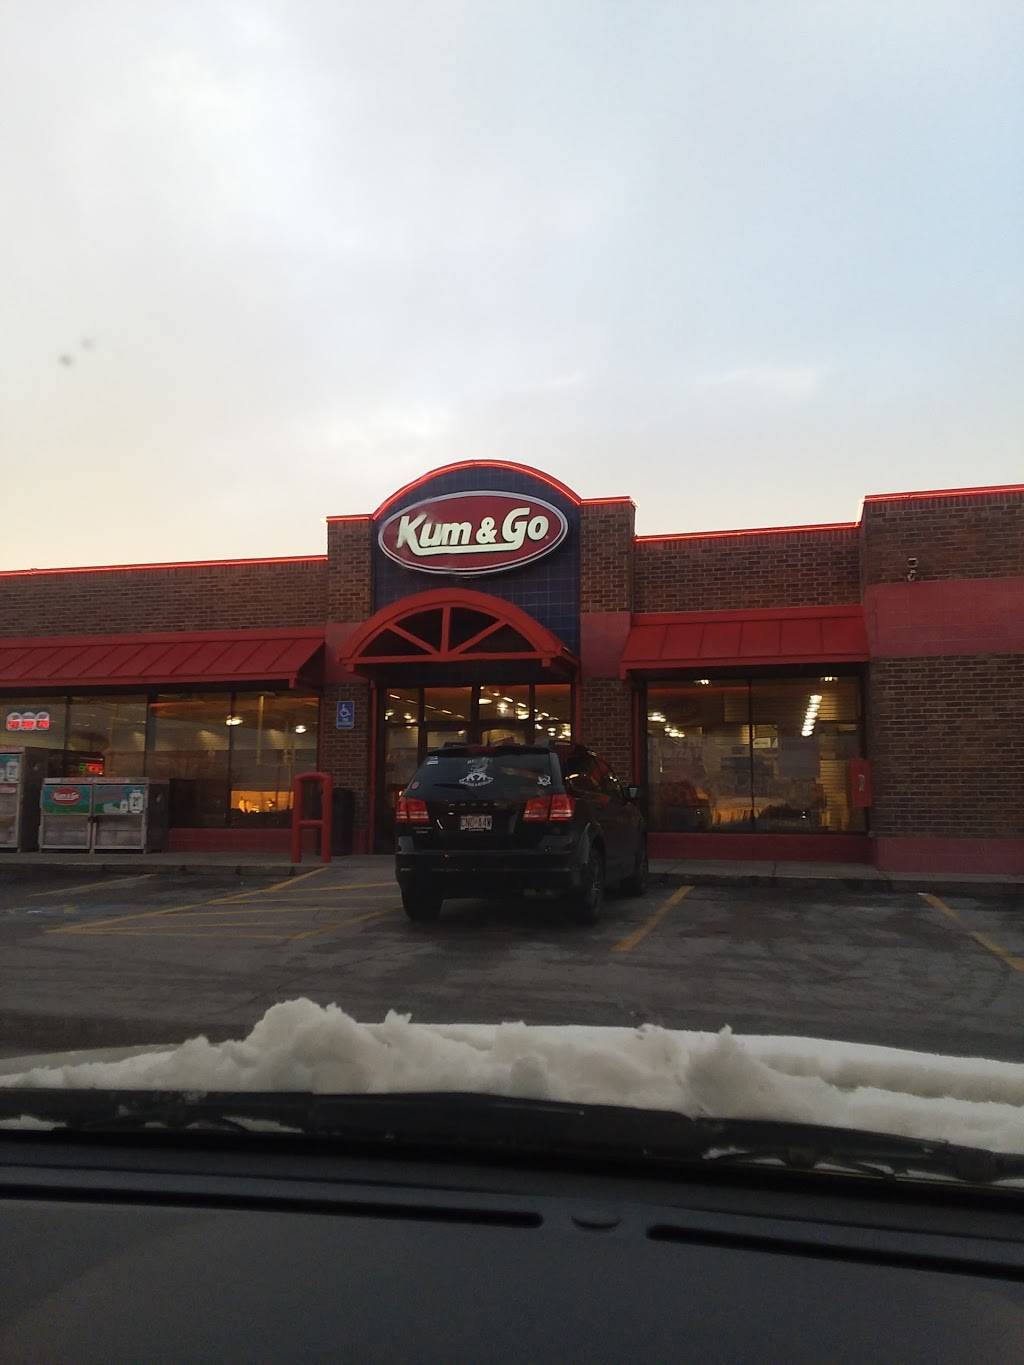 Kum & Go | meal takeaway | 2565 S Springfield Ave, Bolivar, MO 65613, USA | 4177775359 OR +1 417-777-5359